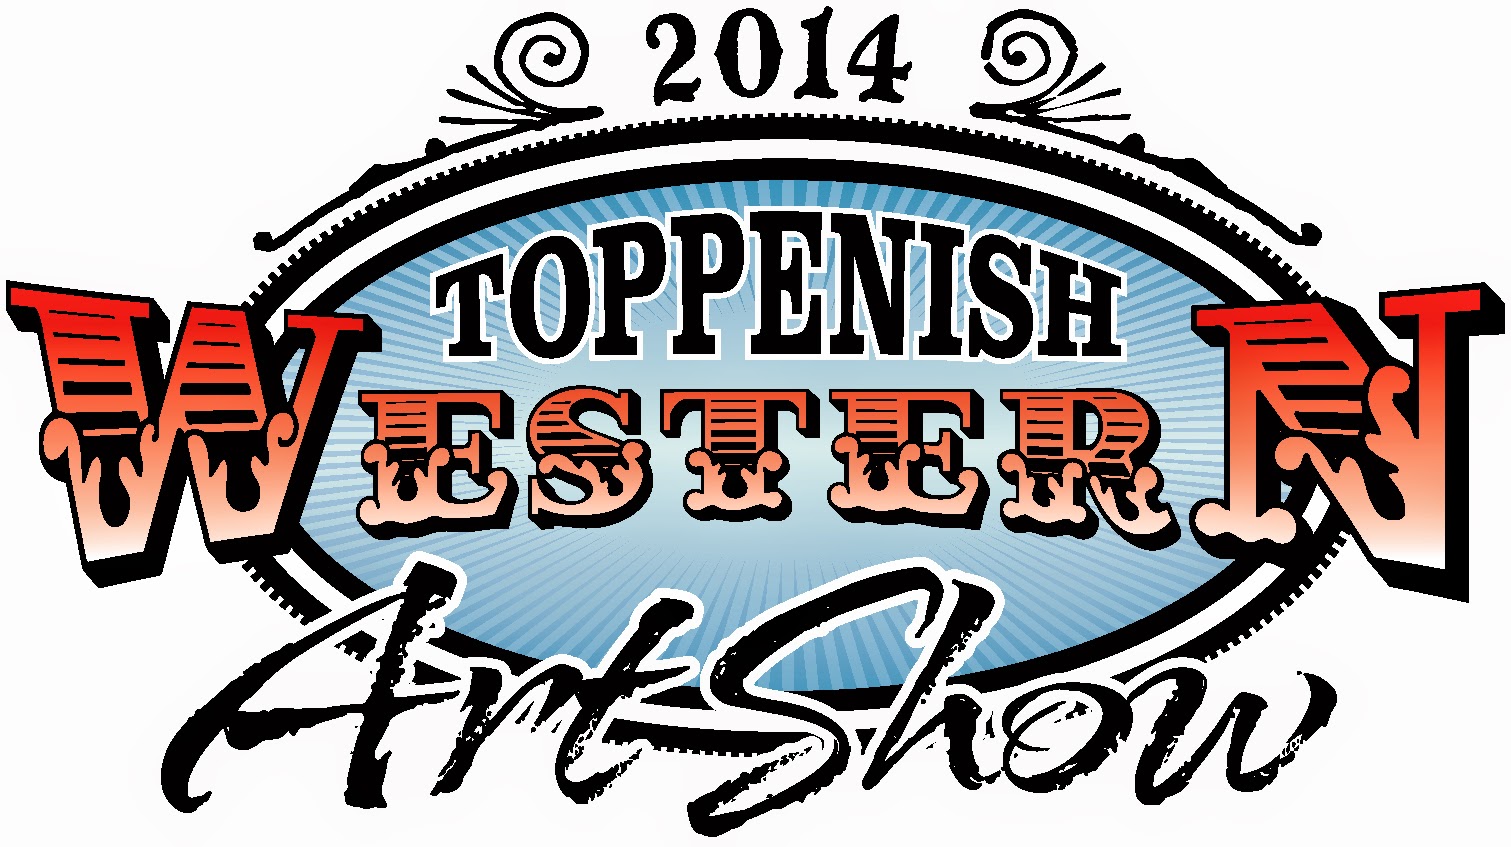 Seventeenth Annual Toppenish Western Art Show In Central Washington